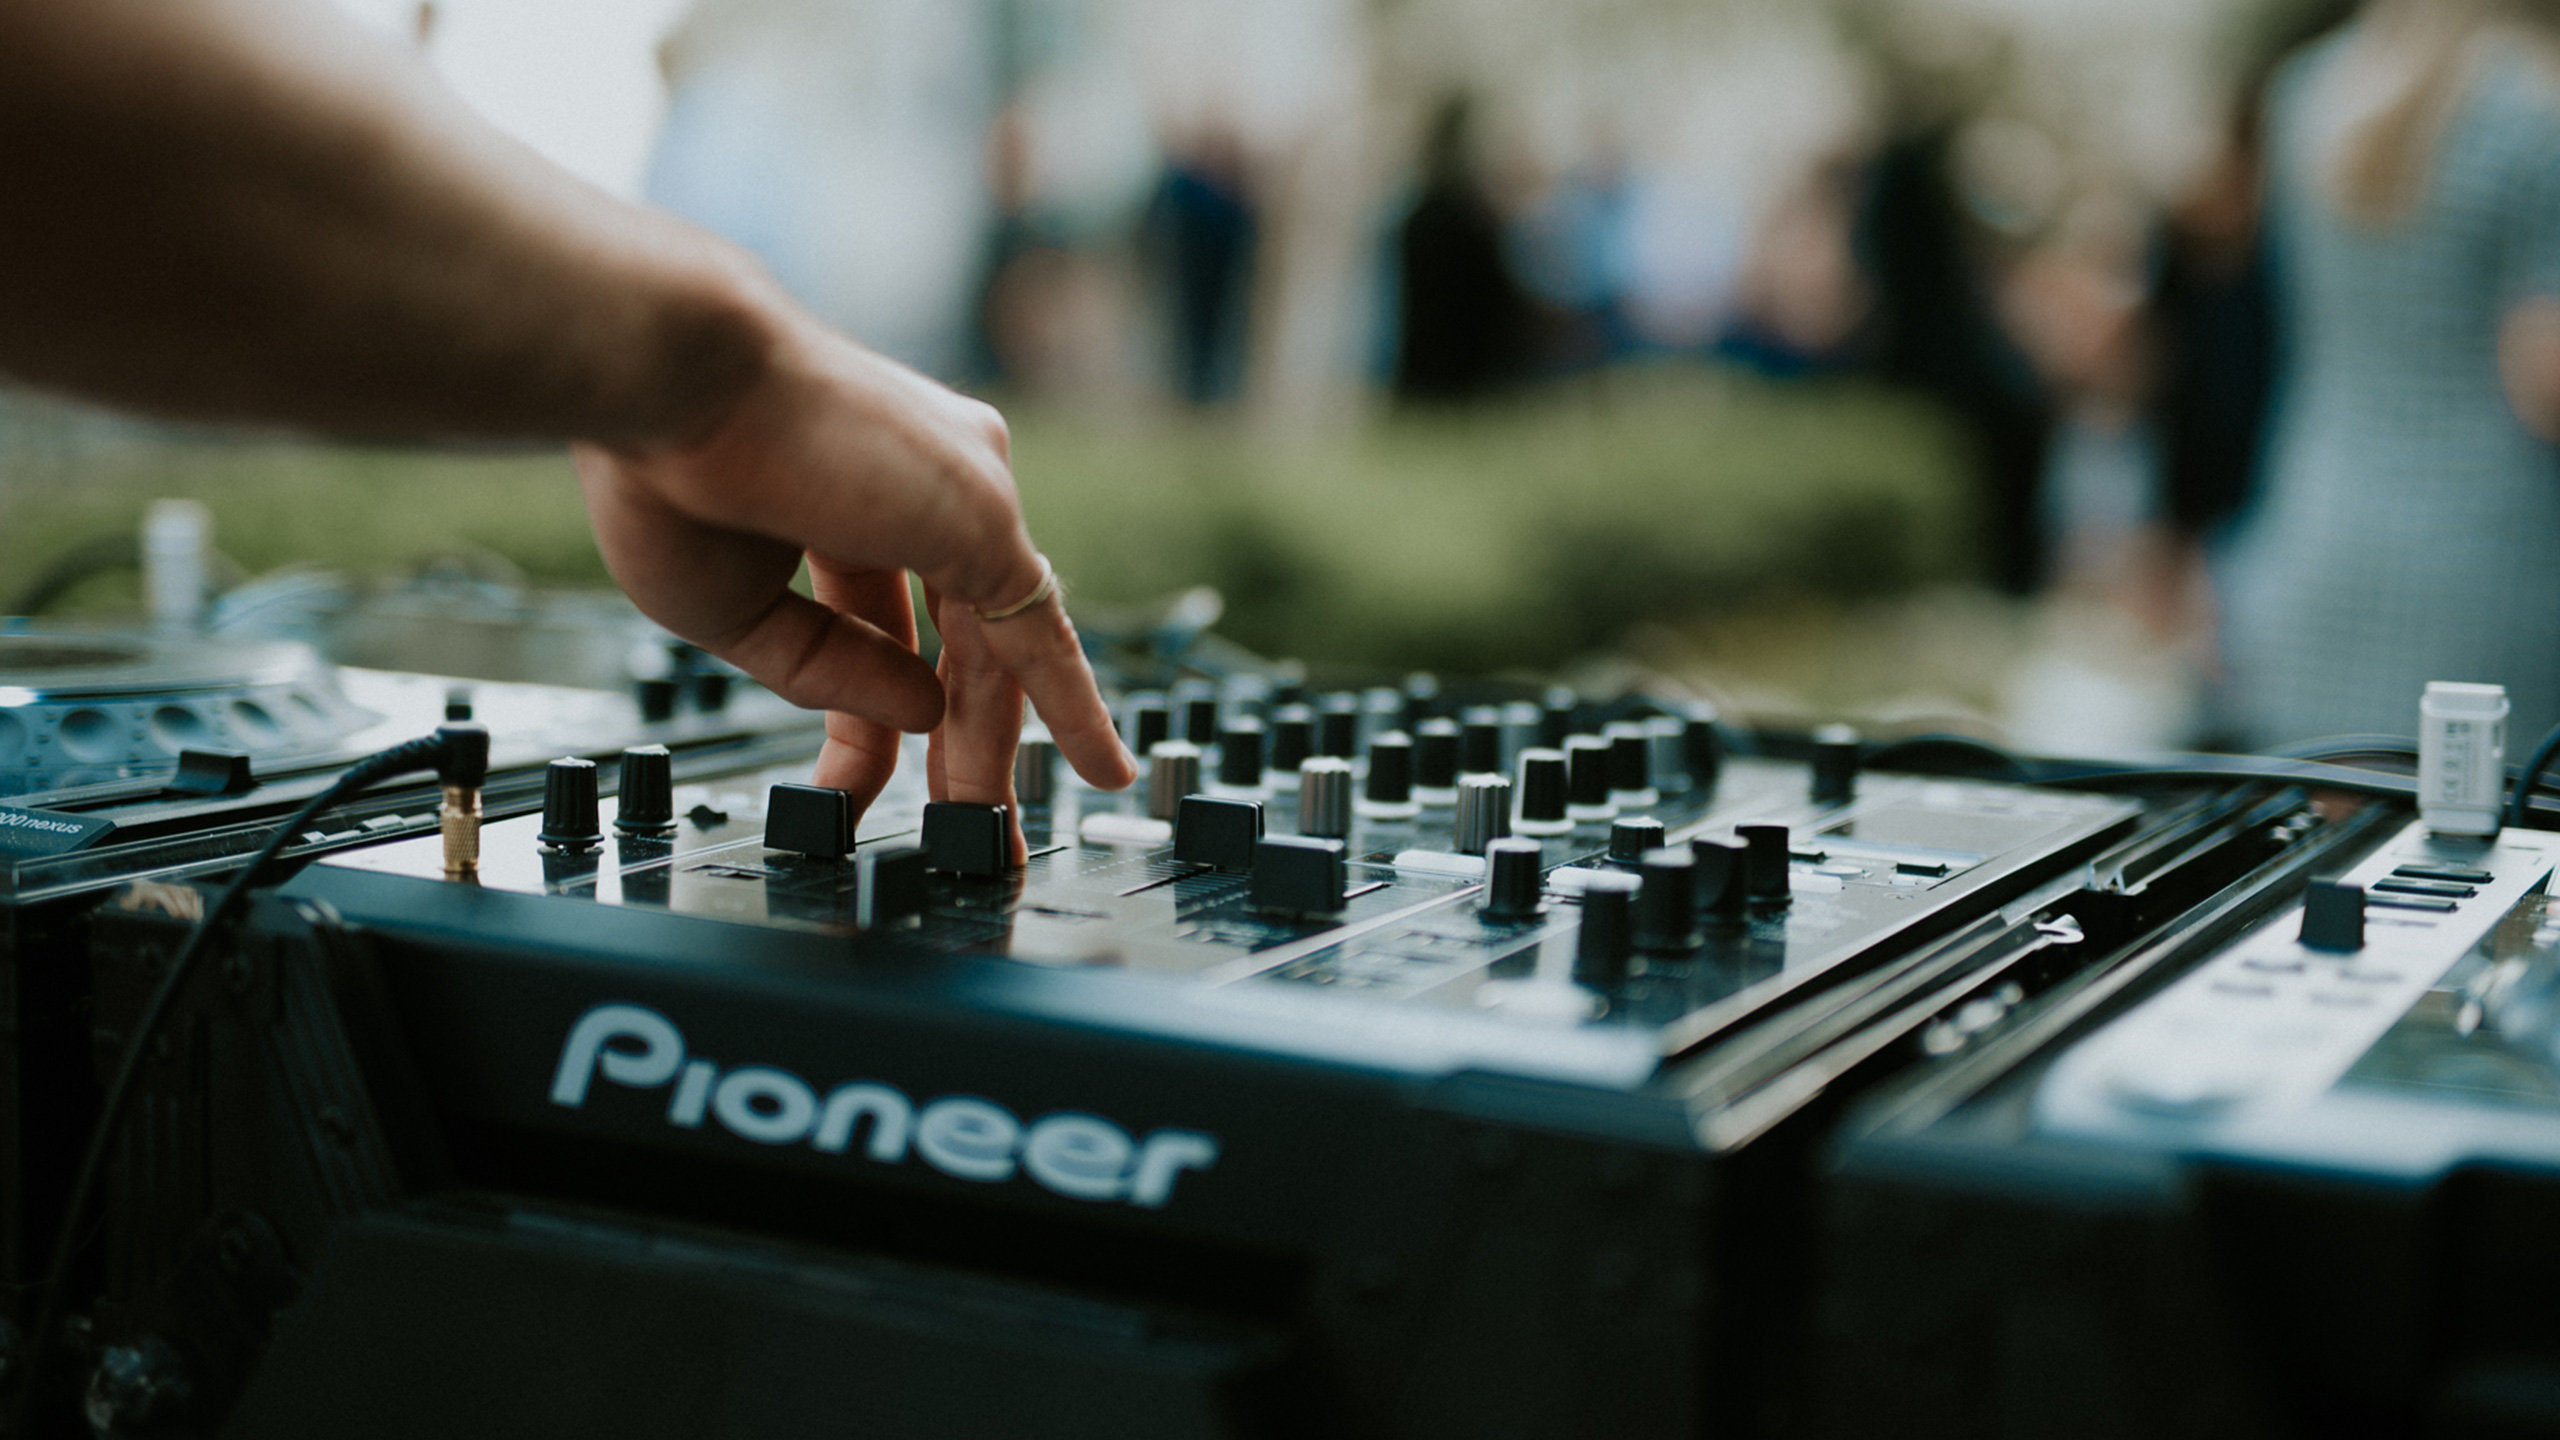 A hand on a mixing desk with people and plants in the background